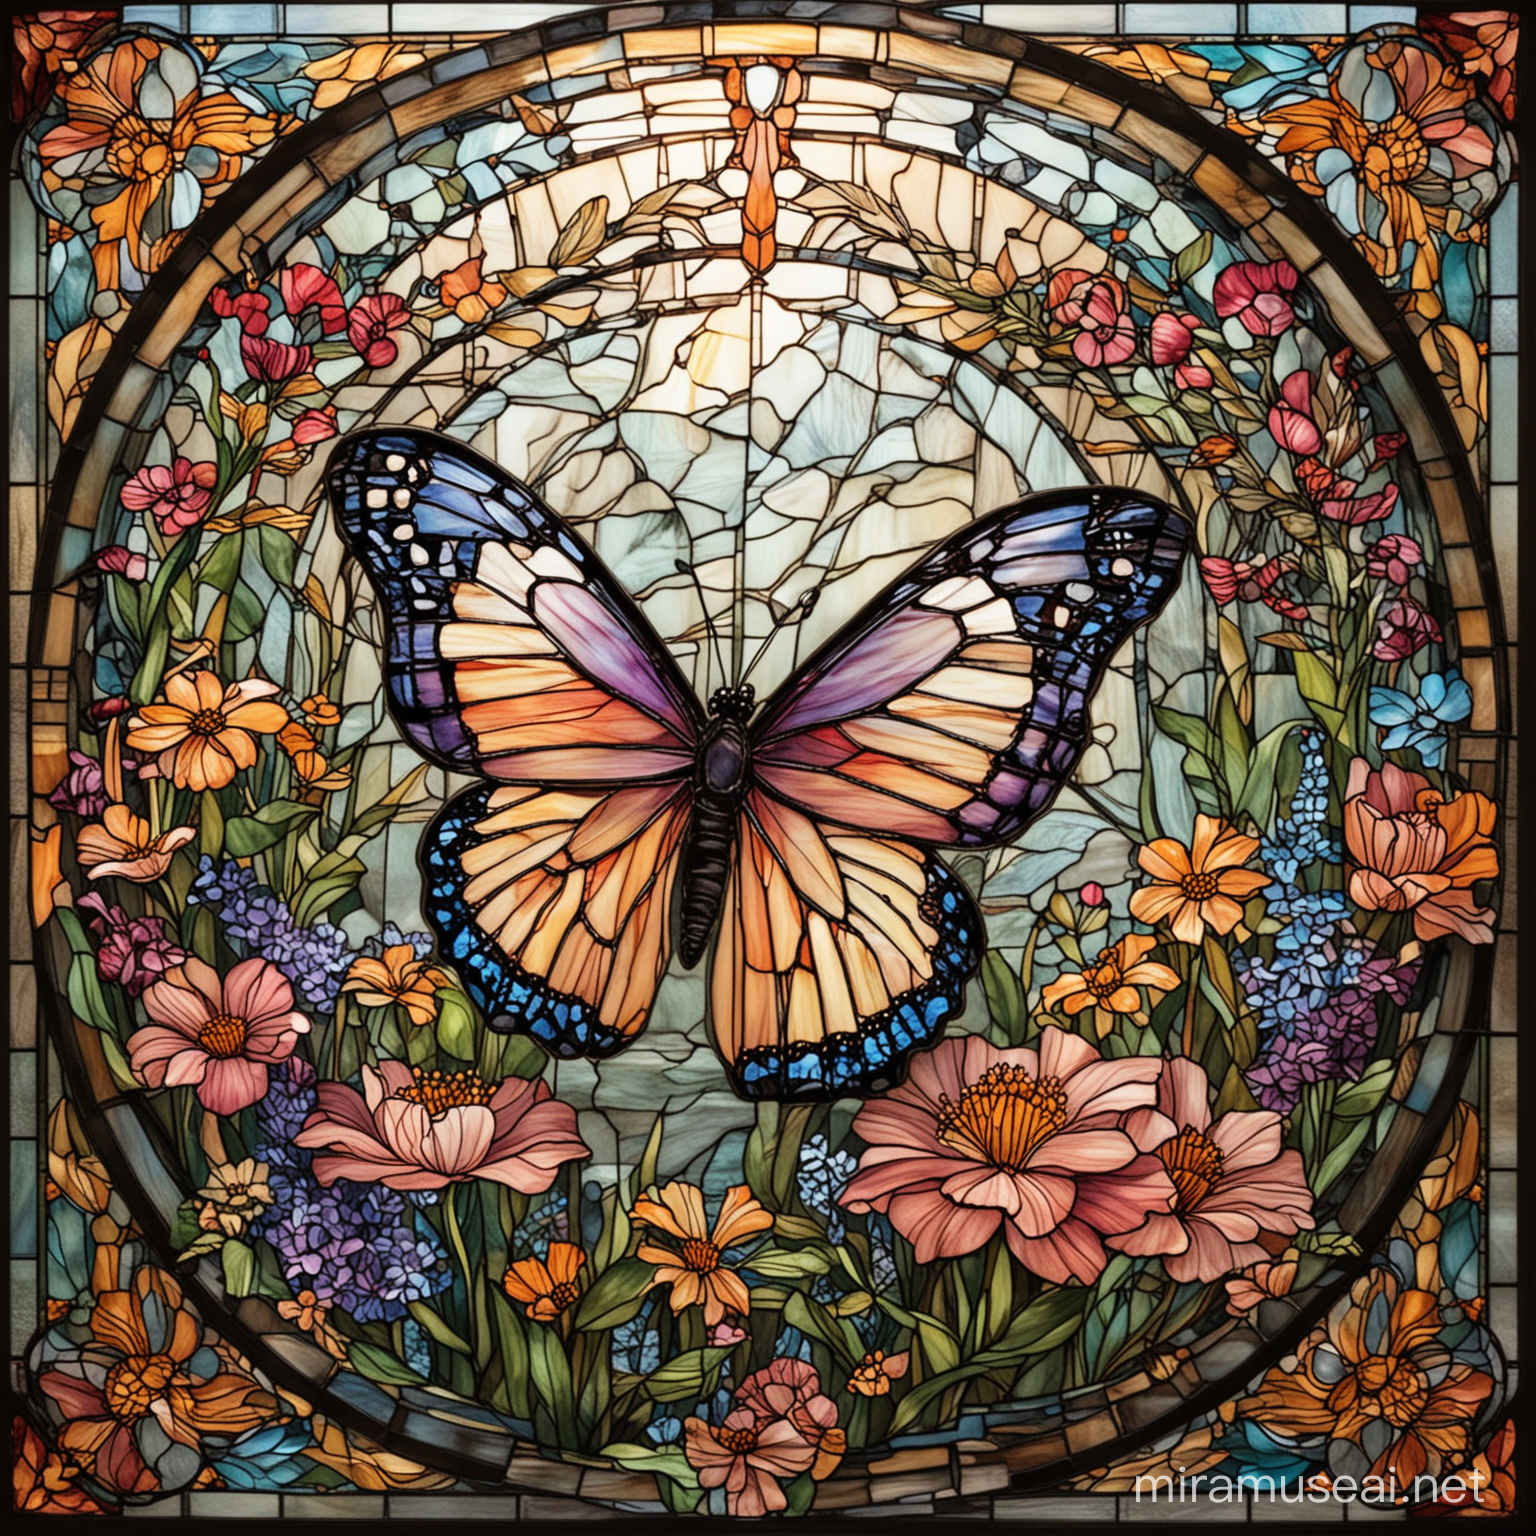 Craft a captivating stained glass-style illustration featuring a graceful butterfly surrounded by an array of vibrant flowers. The butterfly should be depicted with intricate patterns on its wings, radiating elegance and beauty. Surround the butterfly with an assortment of flowers in different shapes and colors, each petal outlined in bold, black lines reminiscent of stained glass. Let the sunlight filter through the translucent colors, casting a warm and enchanting glow on the scene. Capture the essence of nature's beauty and the timeless artistry of stained glass in this mesmerizing illustration